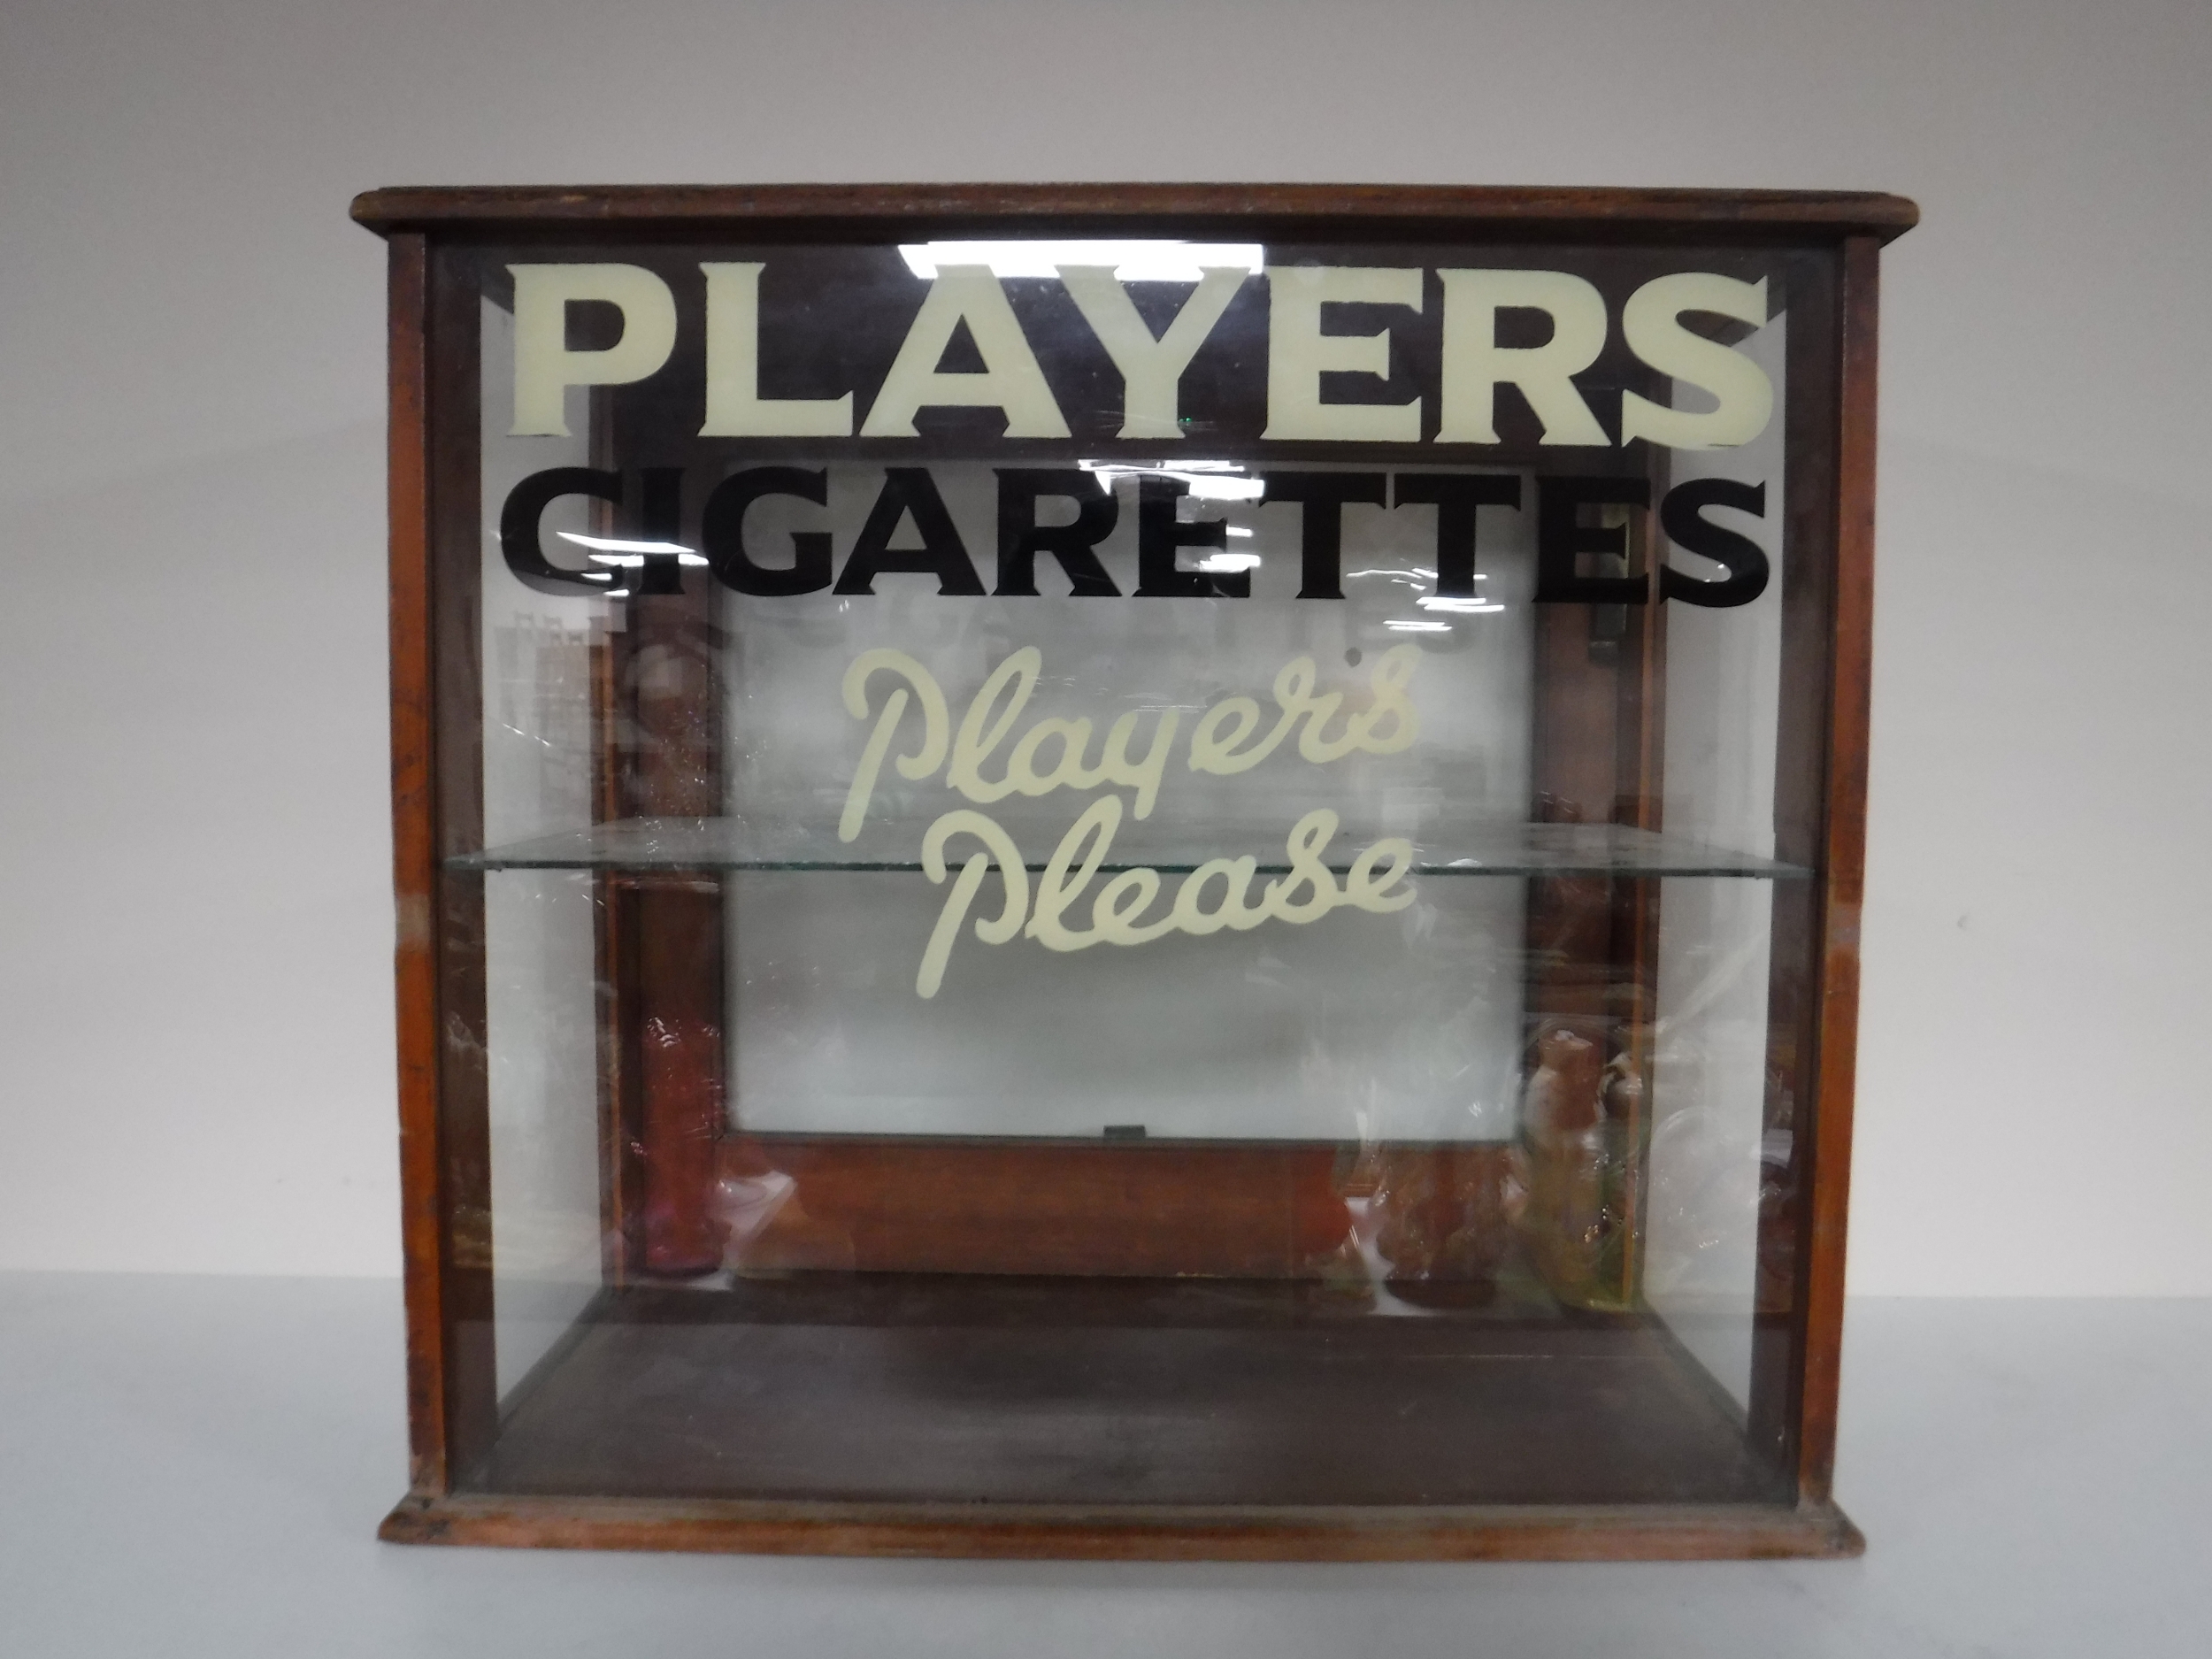 A mahogany counter top display cabinet - Player's cigarettes